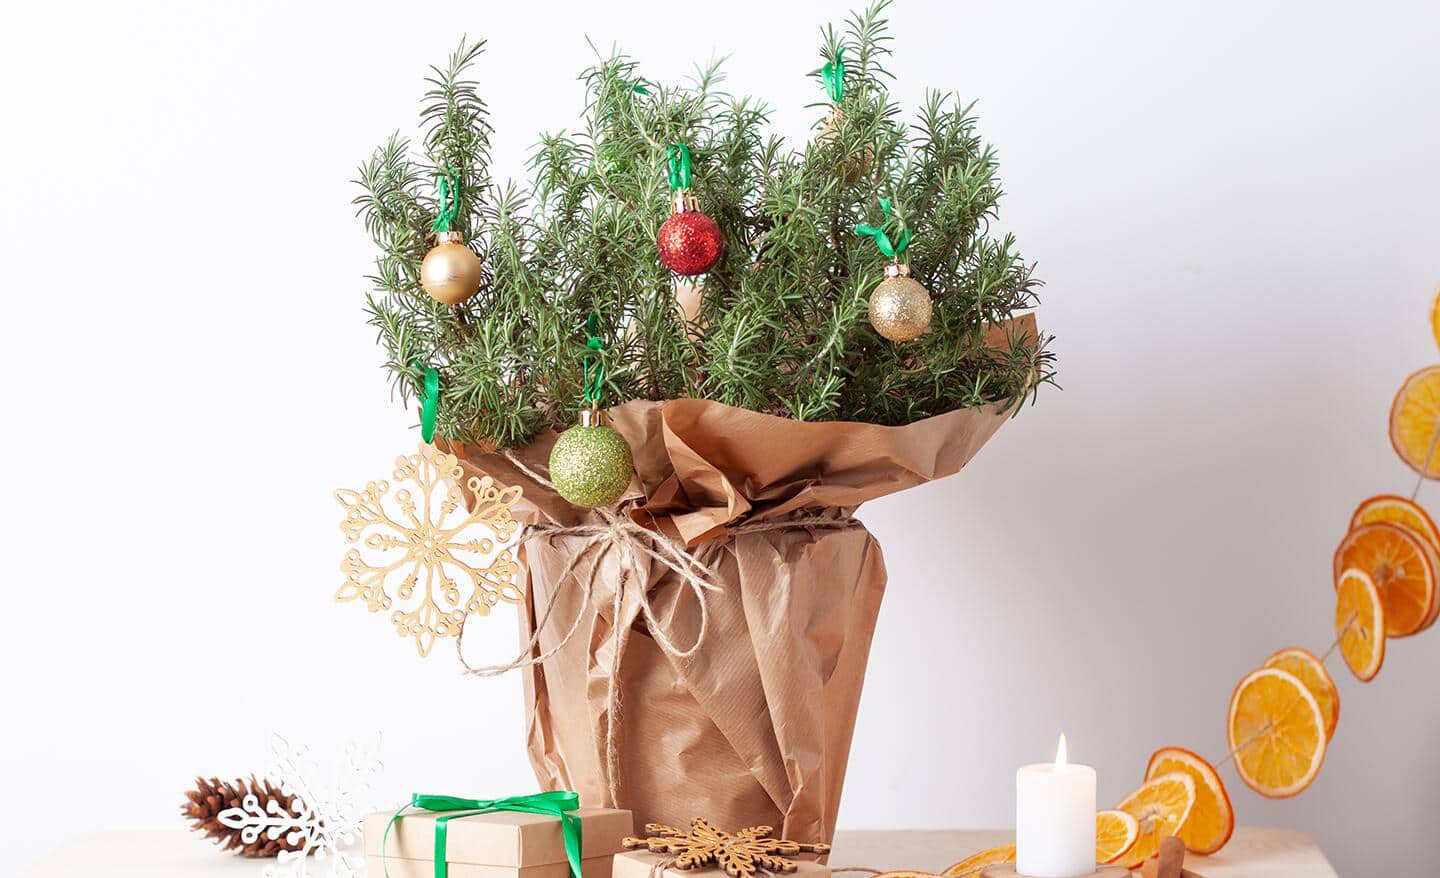 Rosemary shrub with ornaments in a rustic Christmas wrap